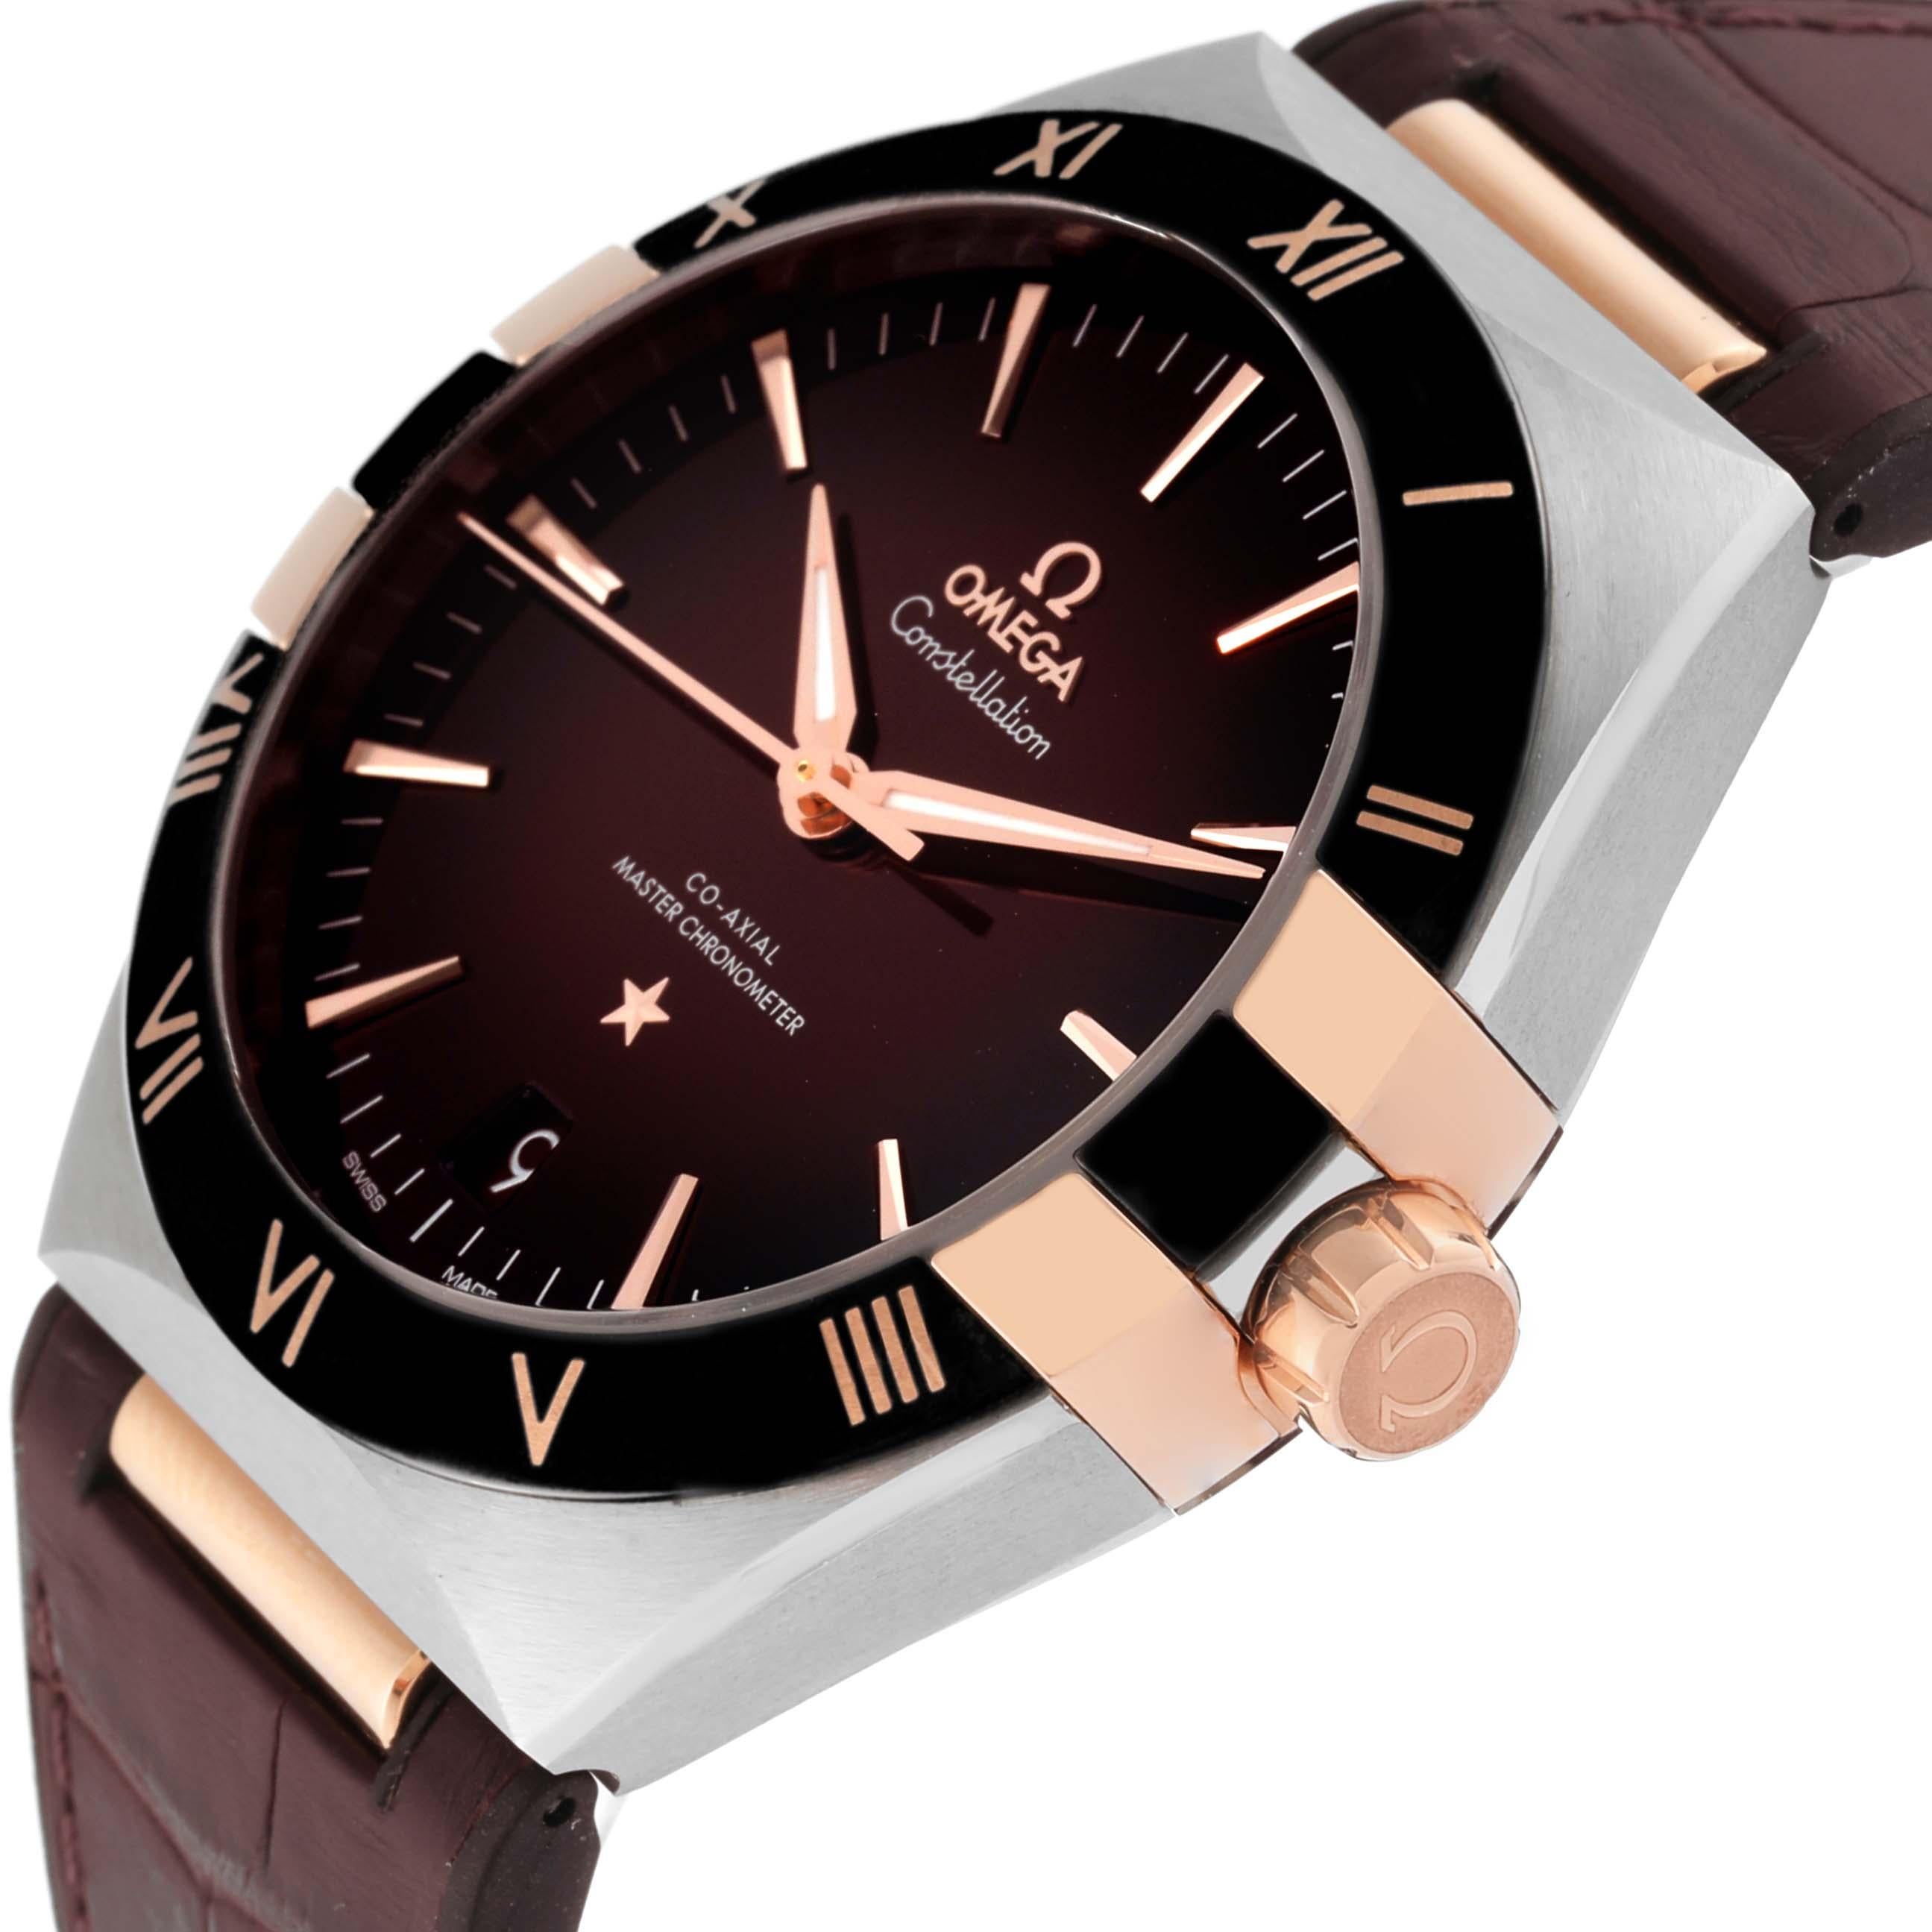 Omega Constellation 41mm Steel Rose Gold Mens Watch 131.23.41.21.11.001 Unworn. Automatic self-winding Co-Axial Escapement movement. Stainless steel case 41.0 mm in diameter. Omega logo on an 18k rose gold crown. Black ceramic bezel with rose gold